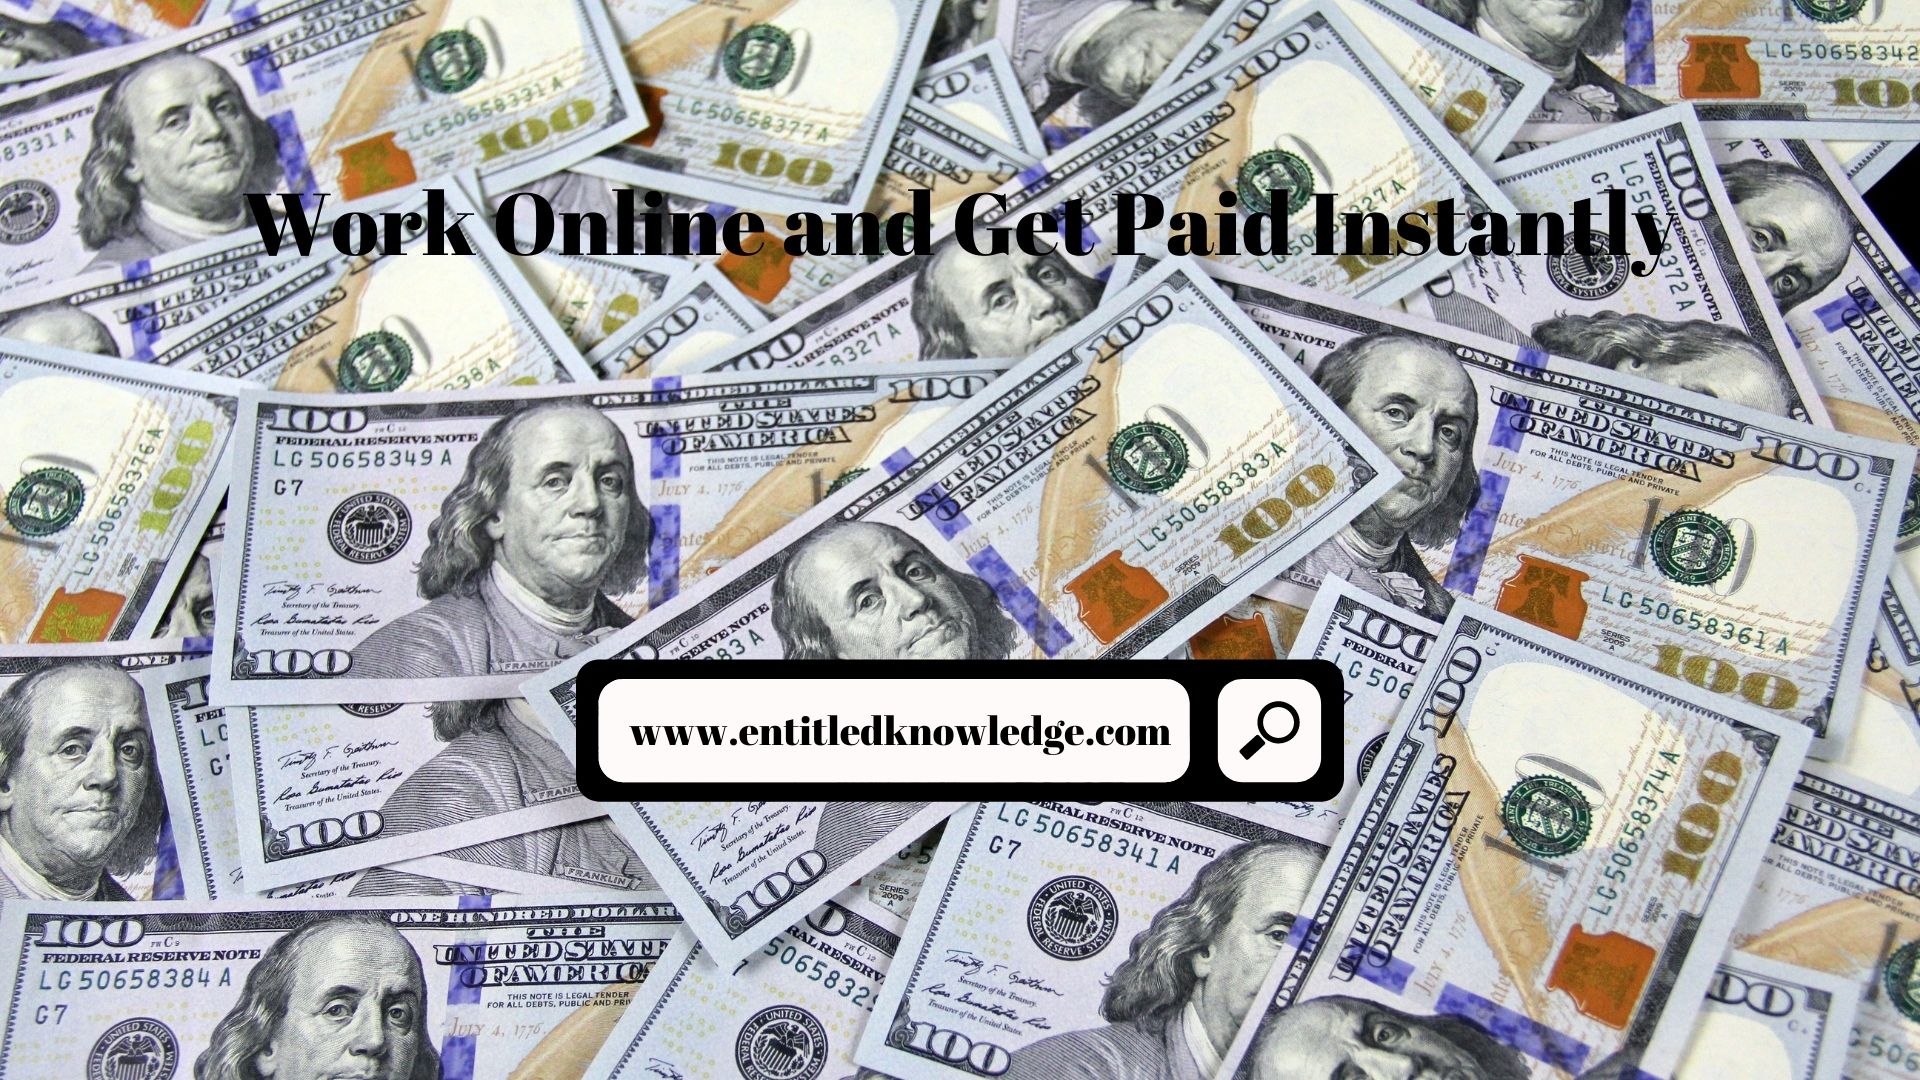 Work Online and Get Paid Instantly